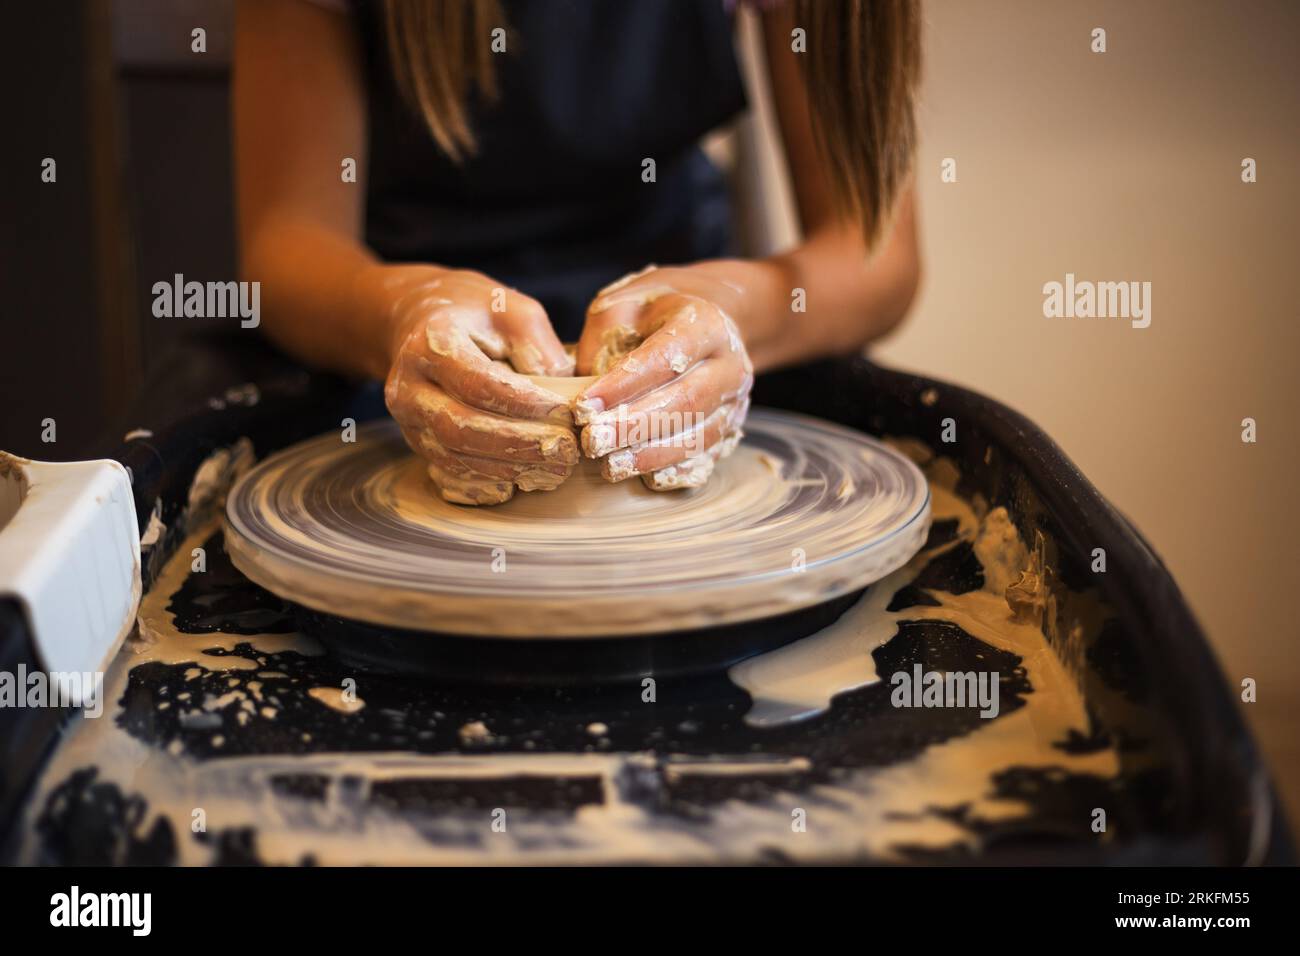 Hands of girl creating bowl on a Potter's wheel close up. Tradit Stock Photo